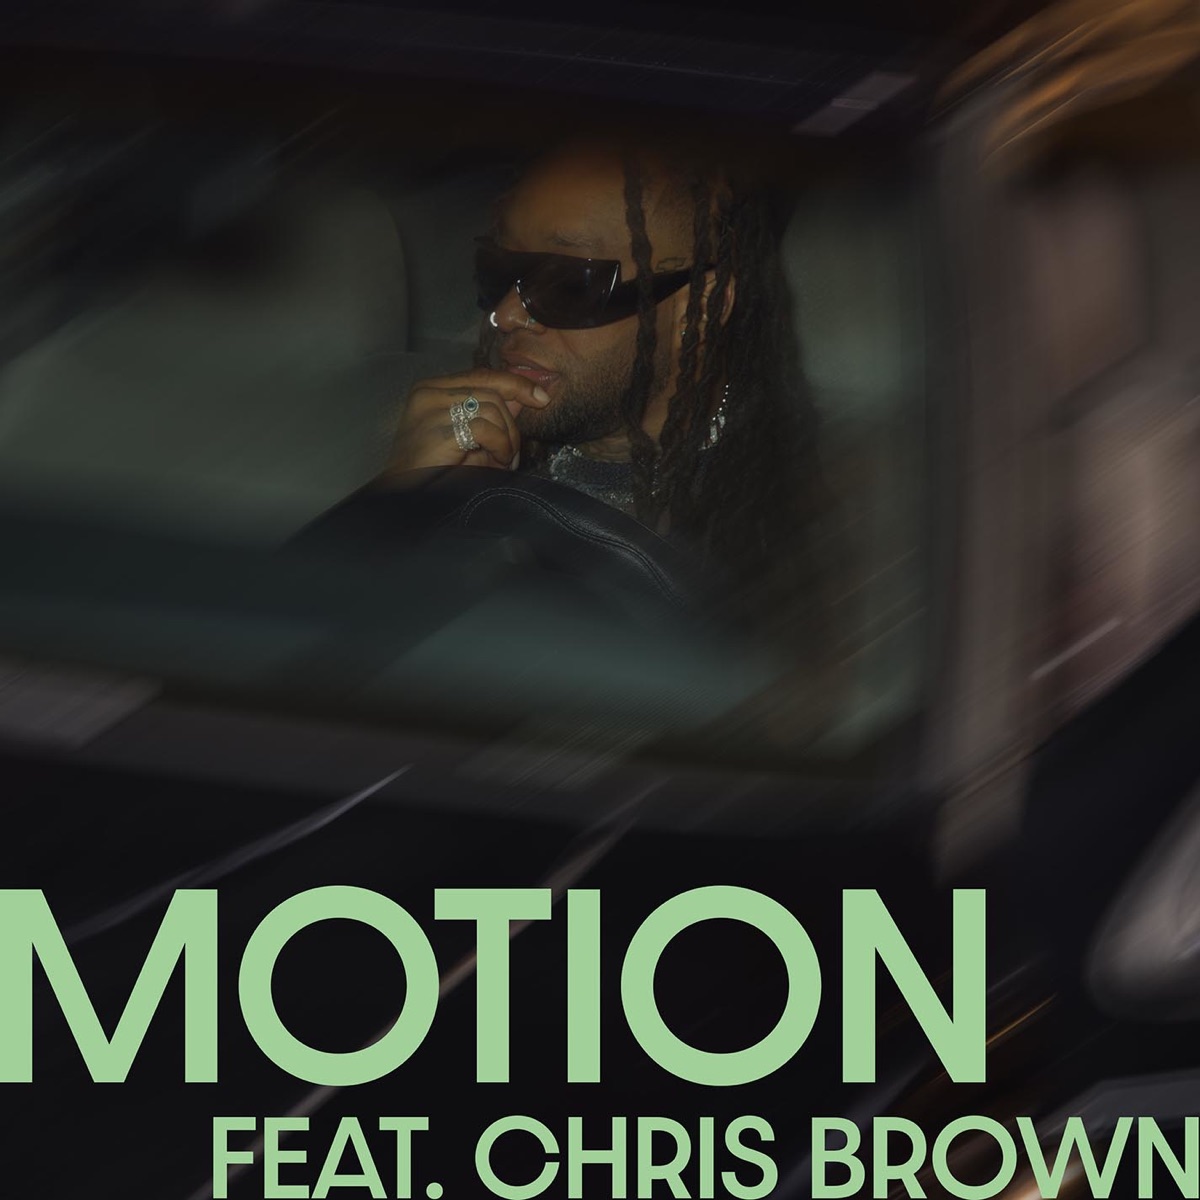 Ty Dolla Sign - Motion feat. Chris Brown Download MP3